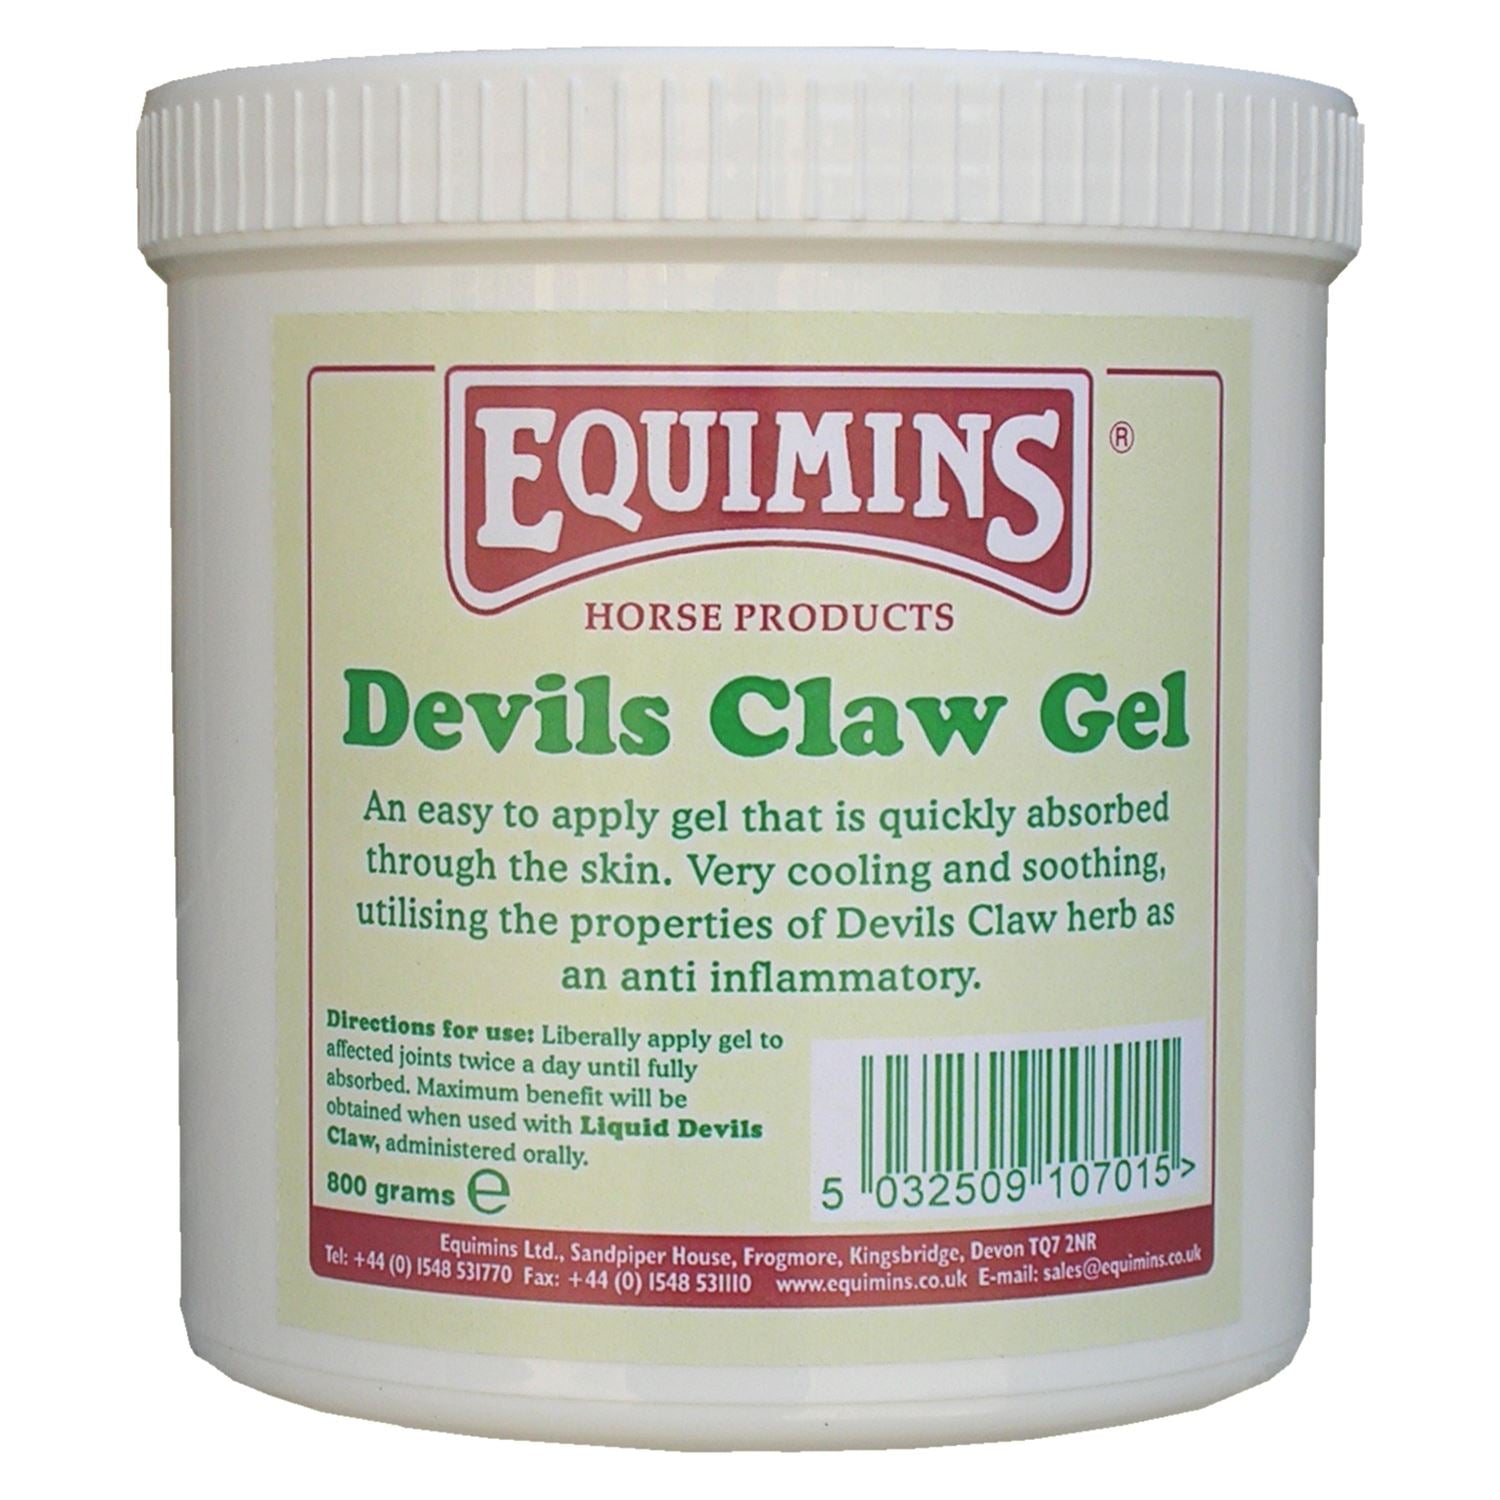 Equimins Devils Claw Gel - Just Horse Riders